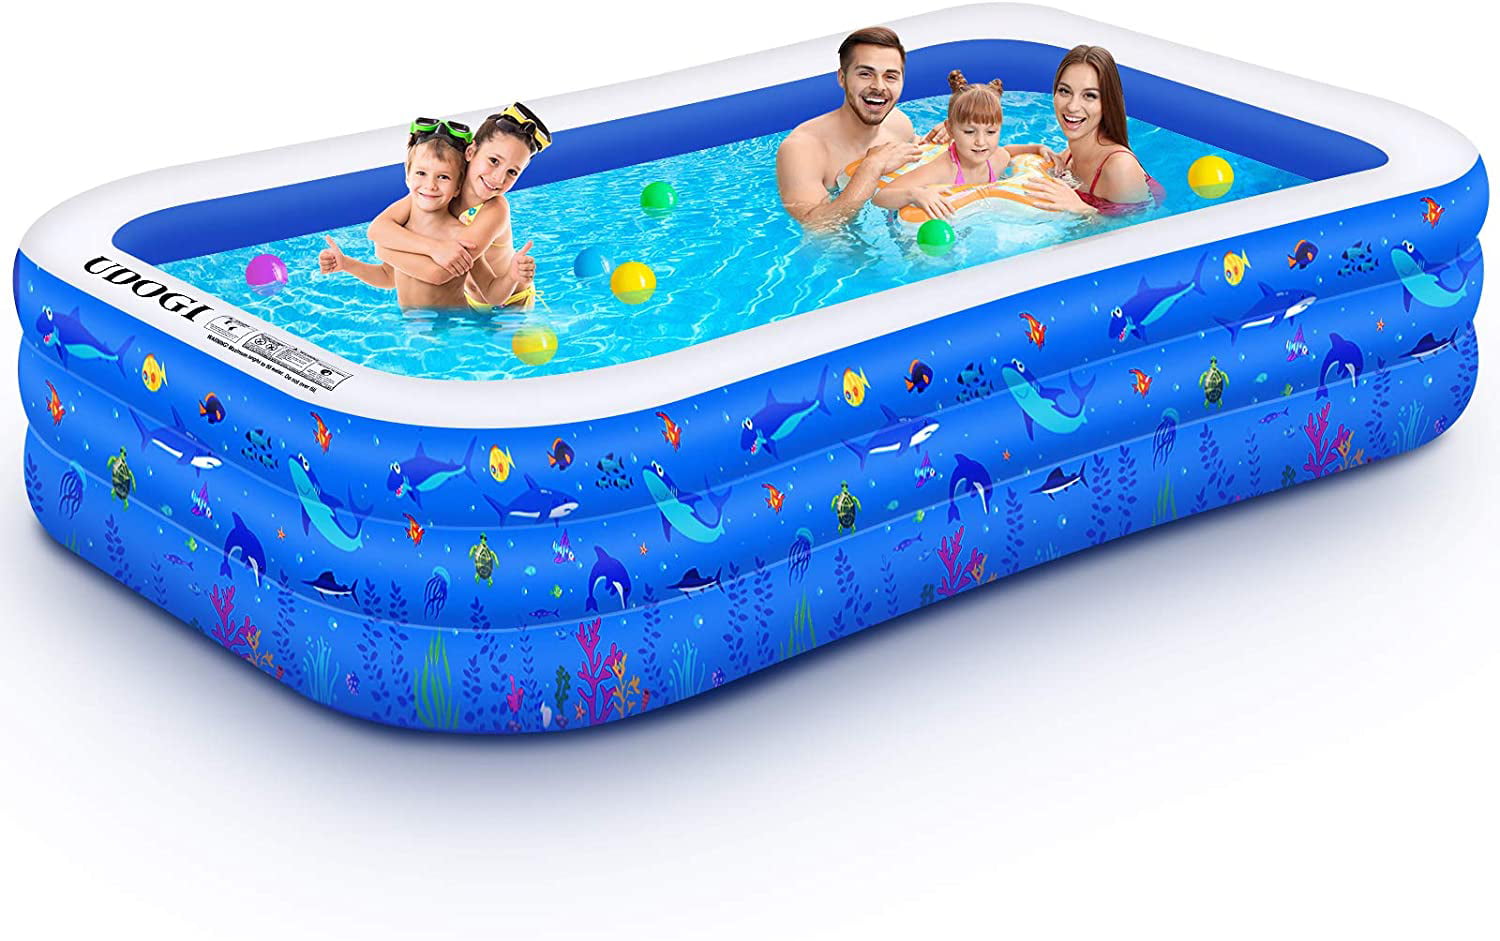 Rectangular Inflatable Swimming Pool Indoor or Outdoor Fits 1-12 Kids,6 size 